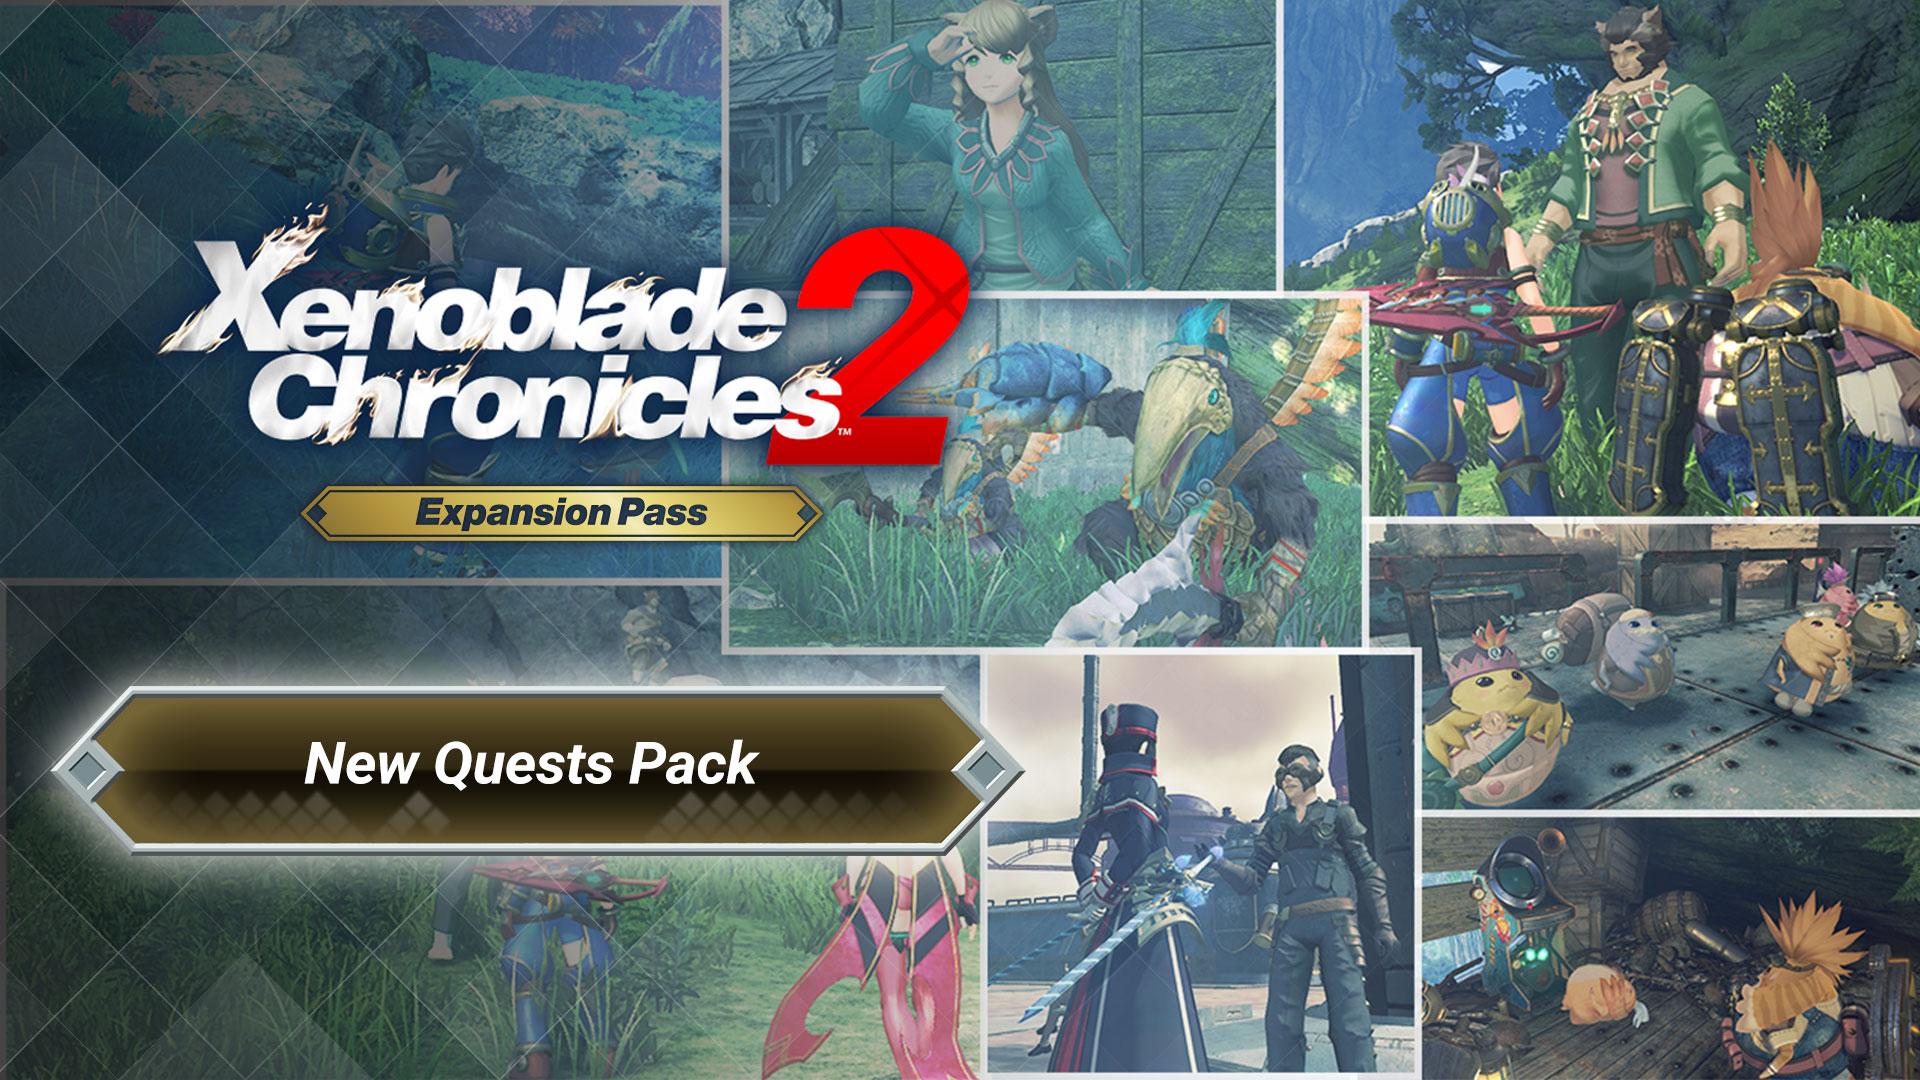 New Quests Pack